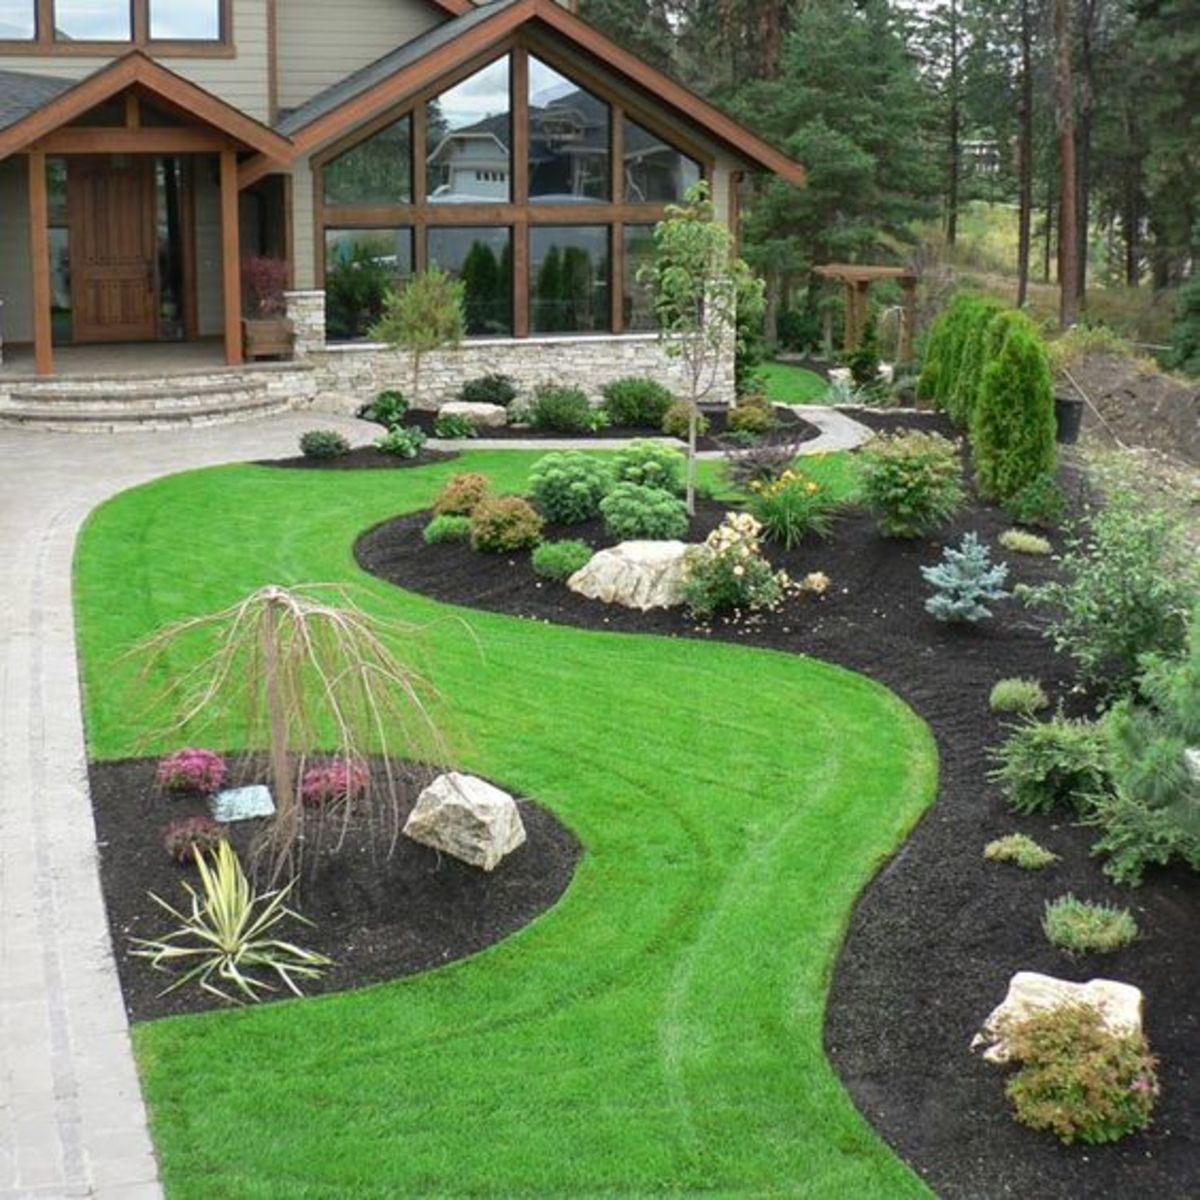 5 Contemporary Front Yard Design Ideas on a Budget